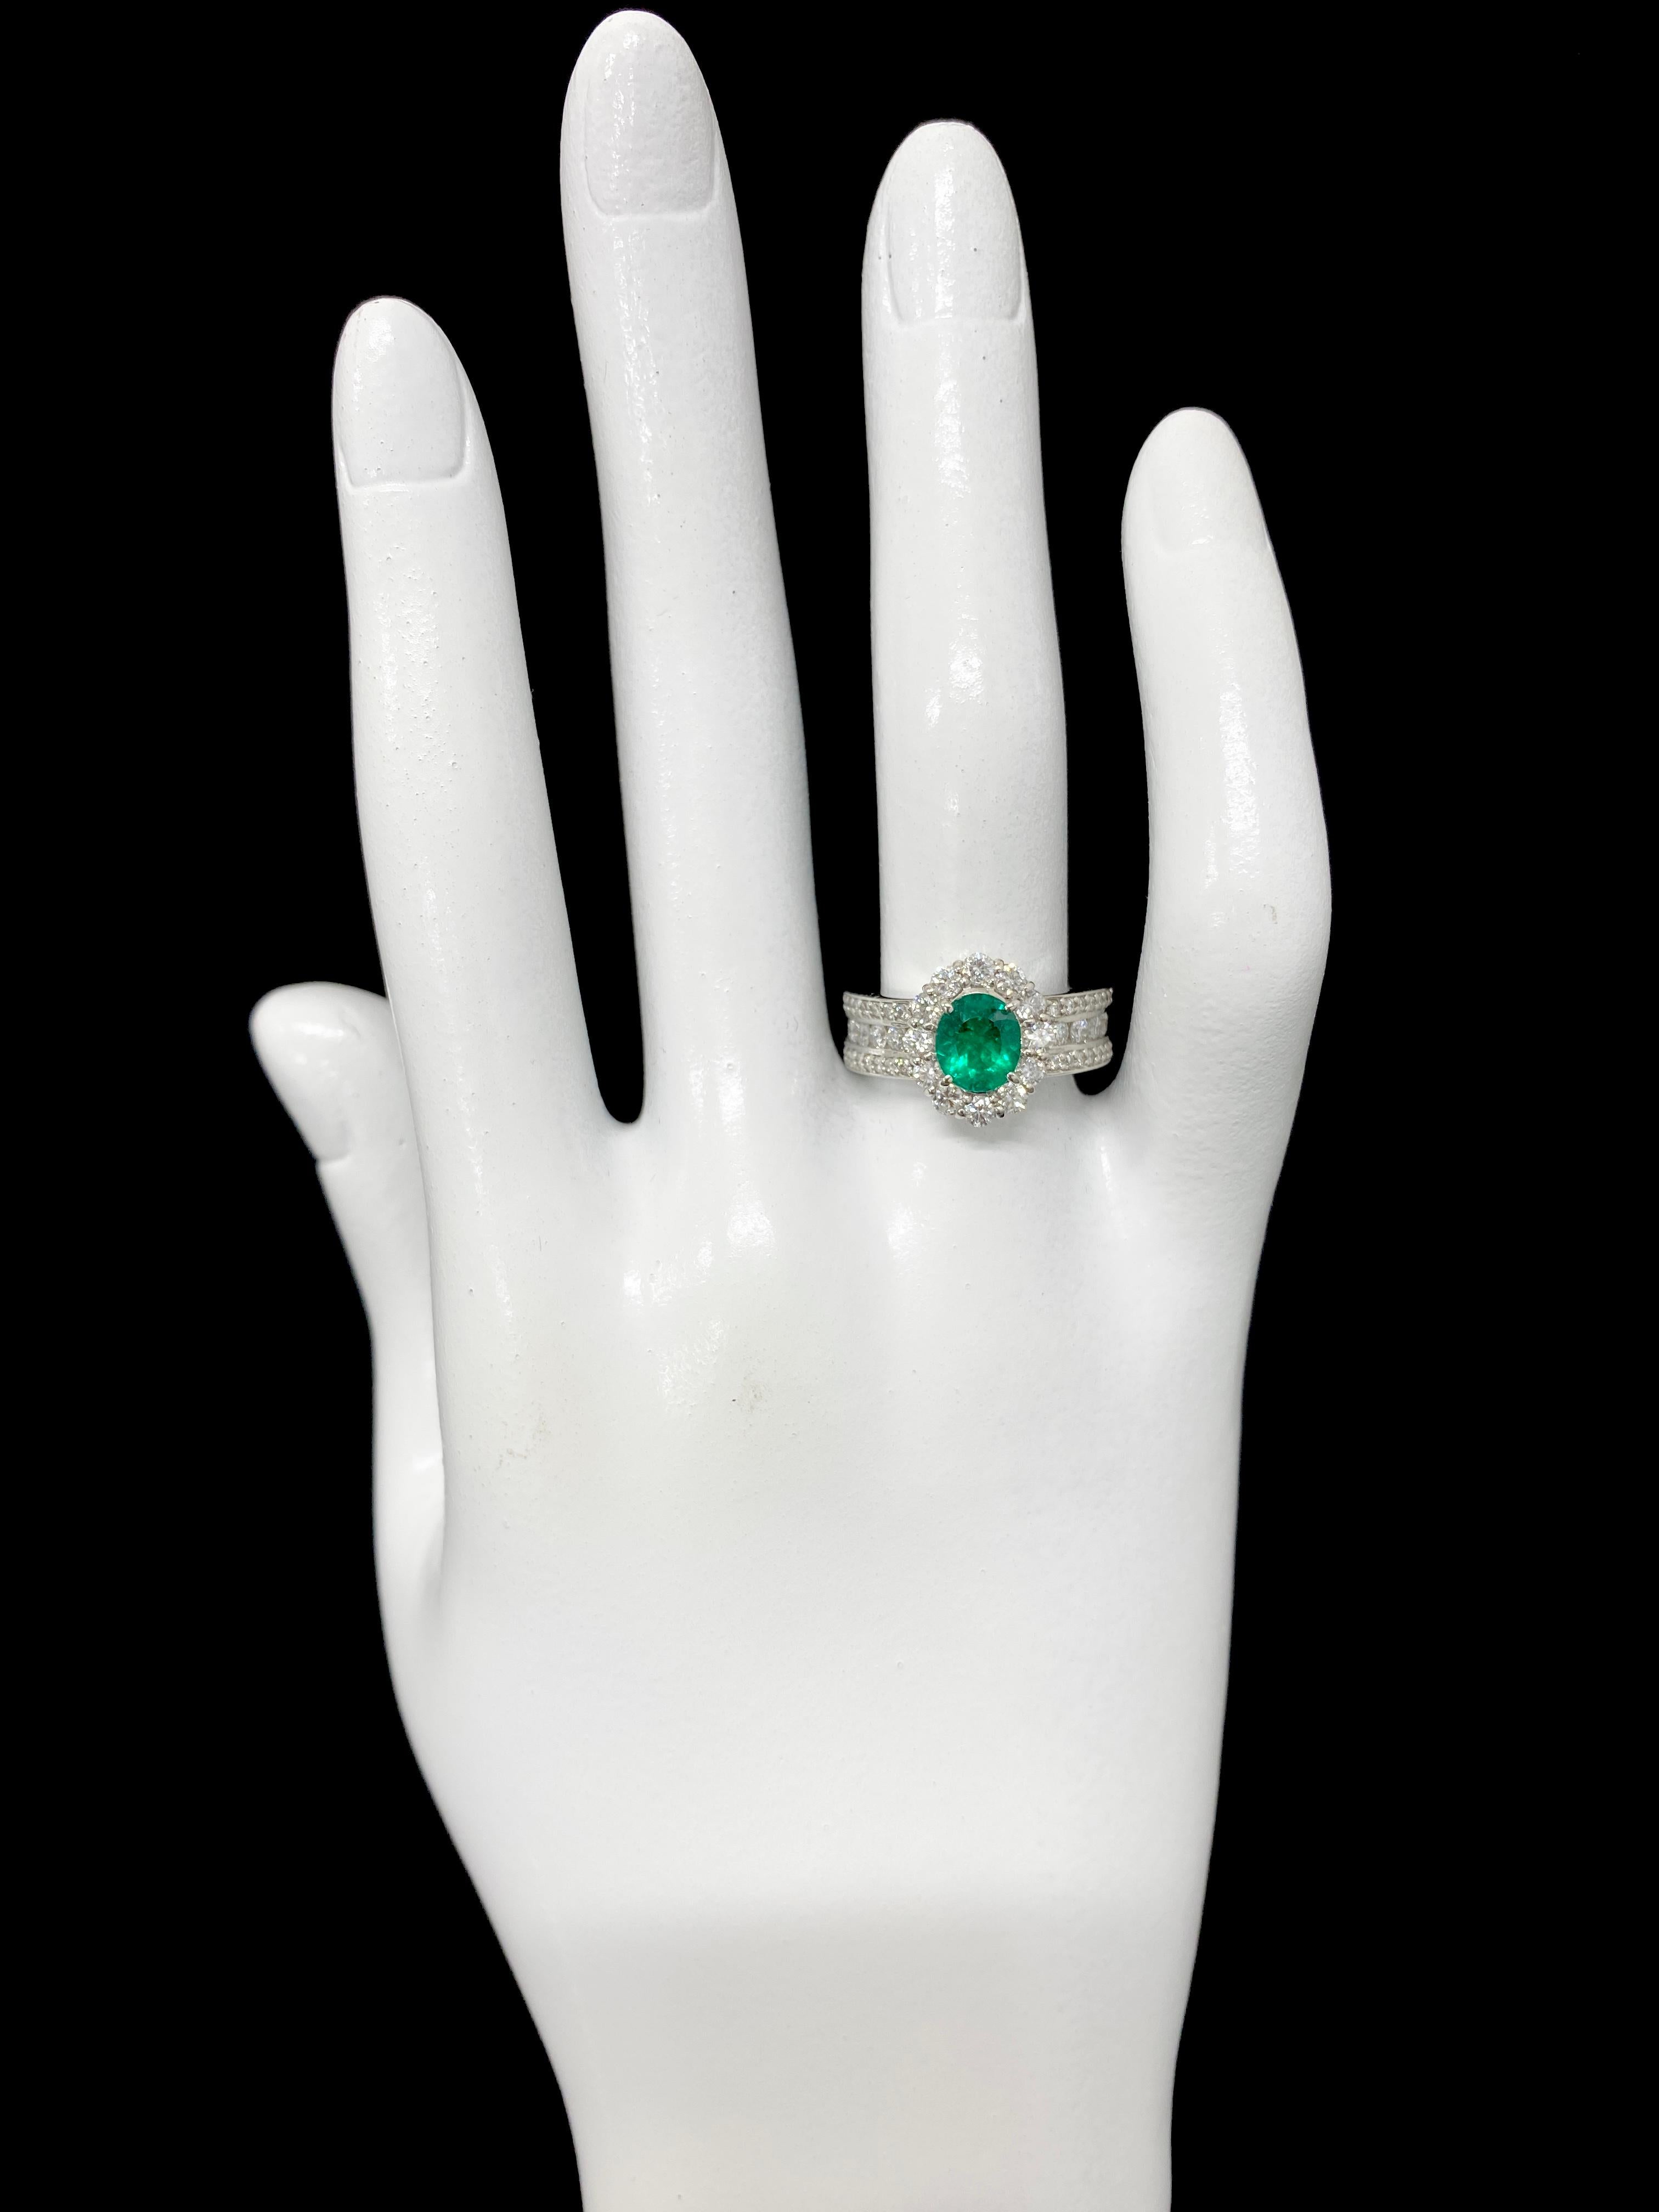 0.74 Carat Natural Untreated 'No-Oil' Emerald and Diamond Ring Set in Platinum 1